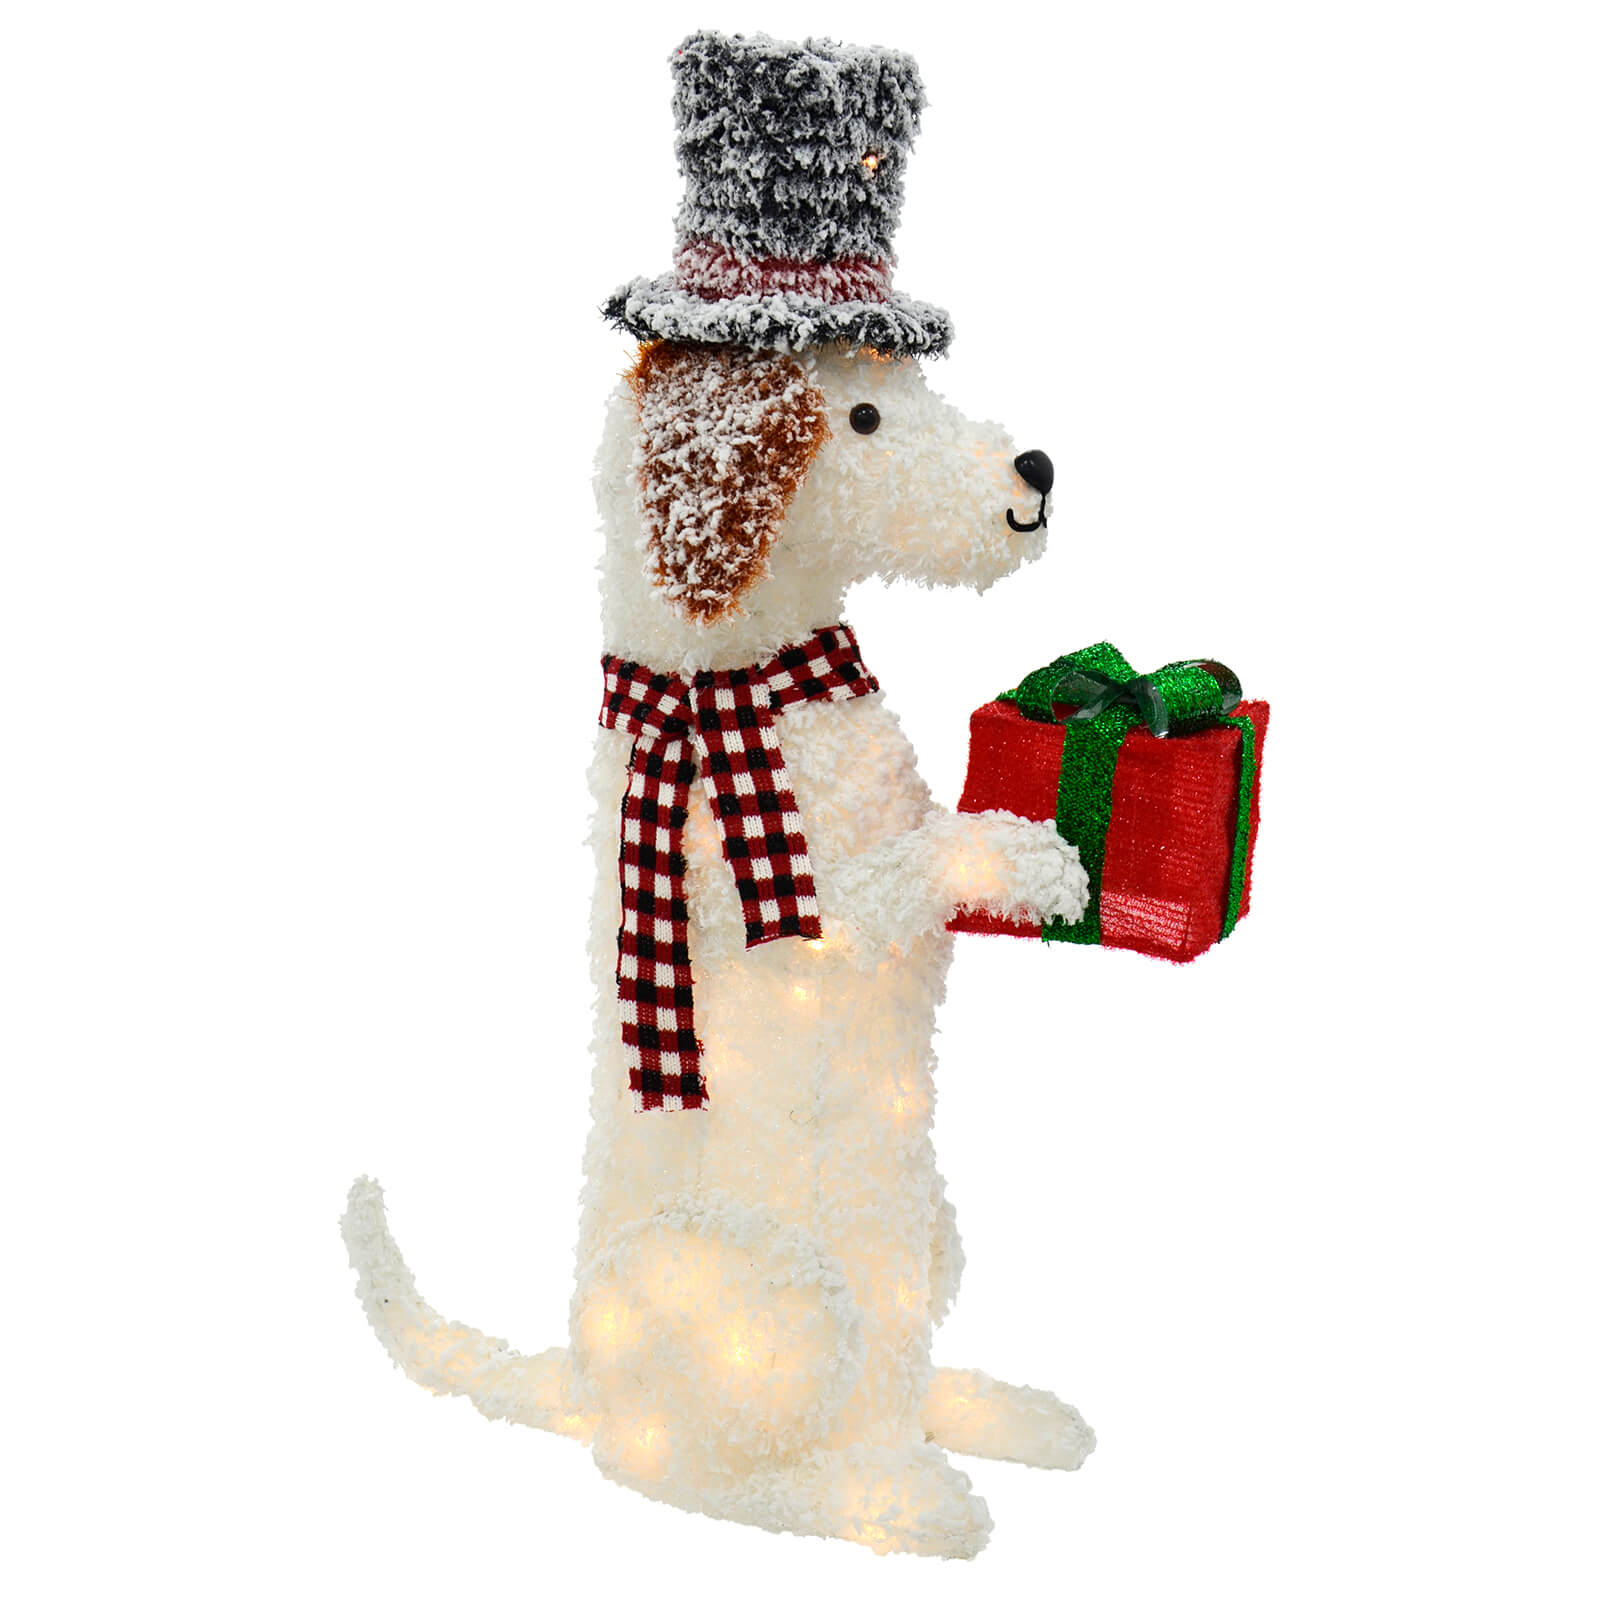 Large white light up dog Christmas decoration with top hat, red checked scarf, green and red gift, and lit by warm white LED lights